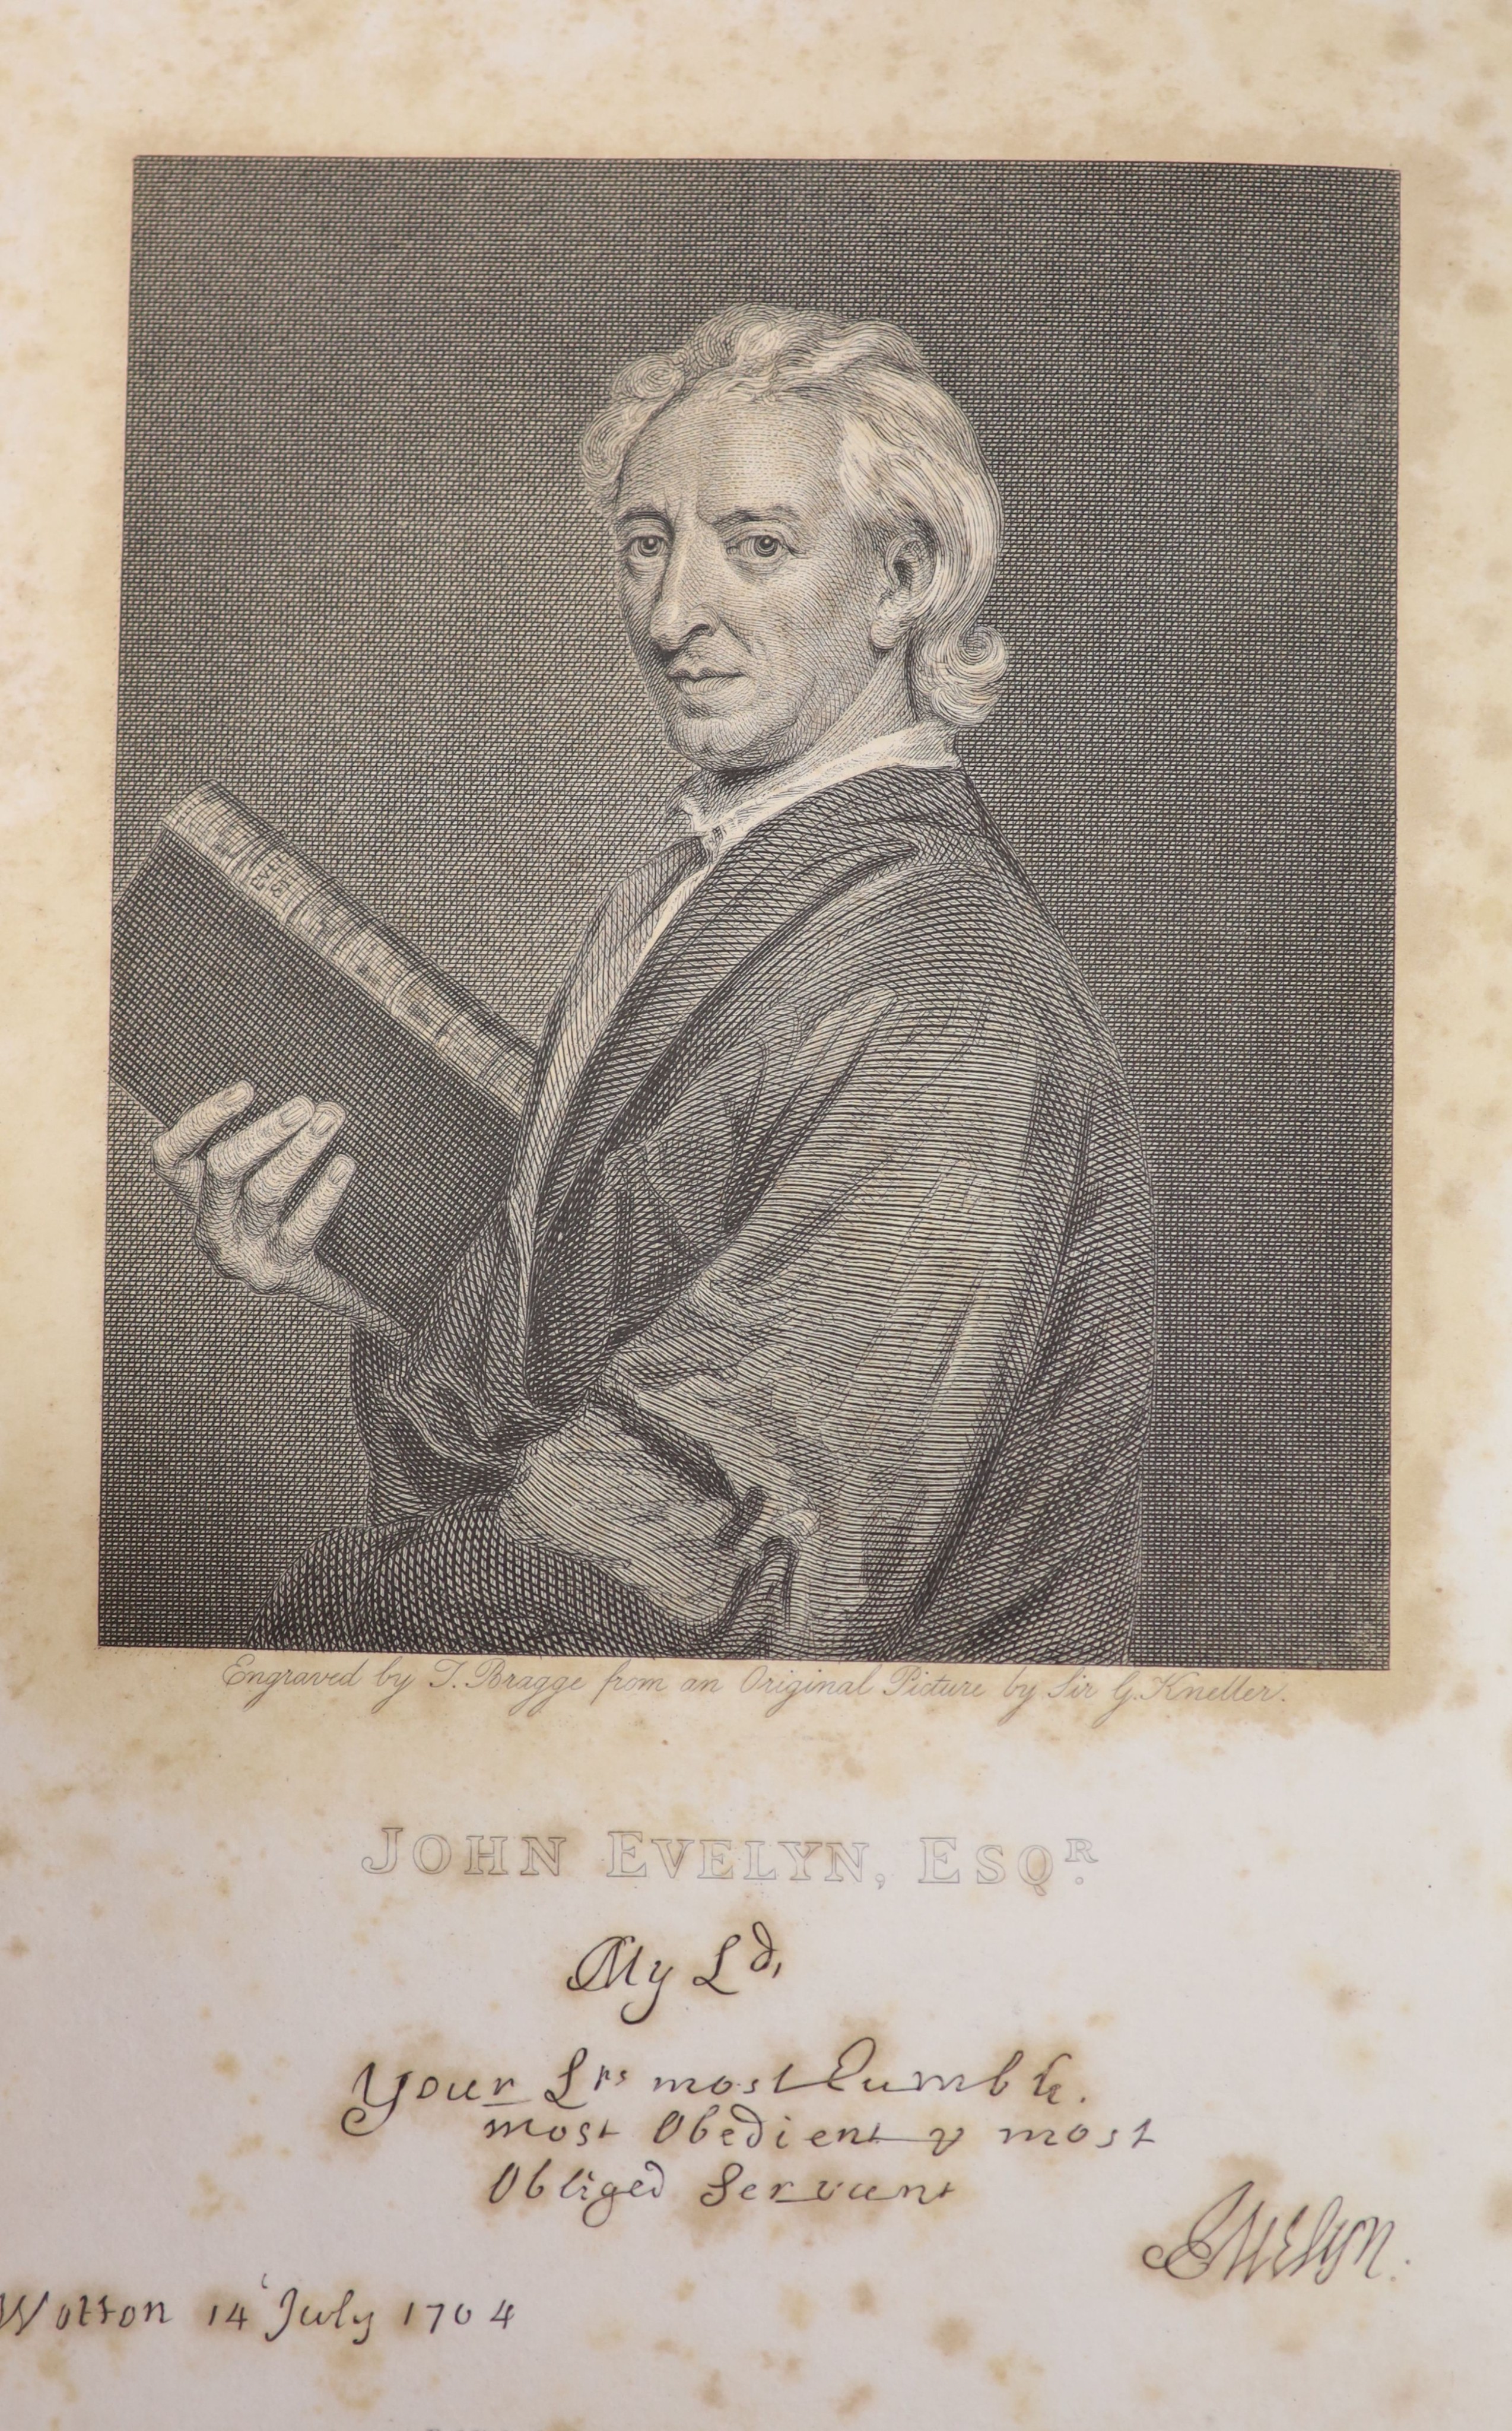 ° Bray, William (editor) - Memoirs of John Evelyn, Esq; F.R.S. Author of the “Sylva”… Comprising his - Image 3 of 4